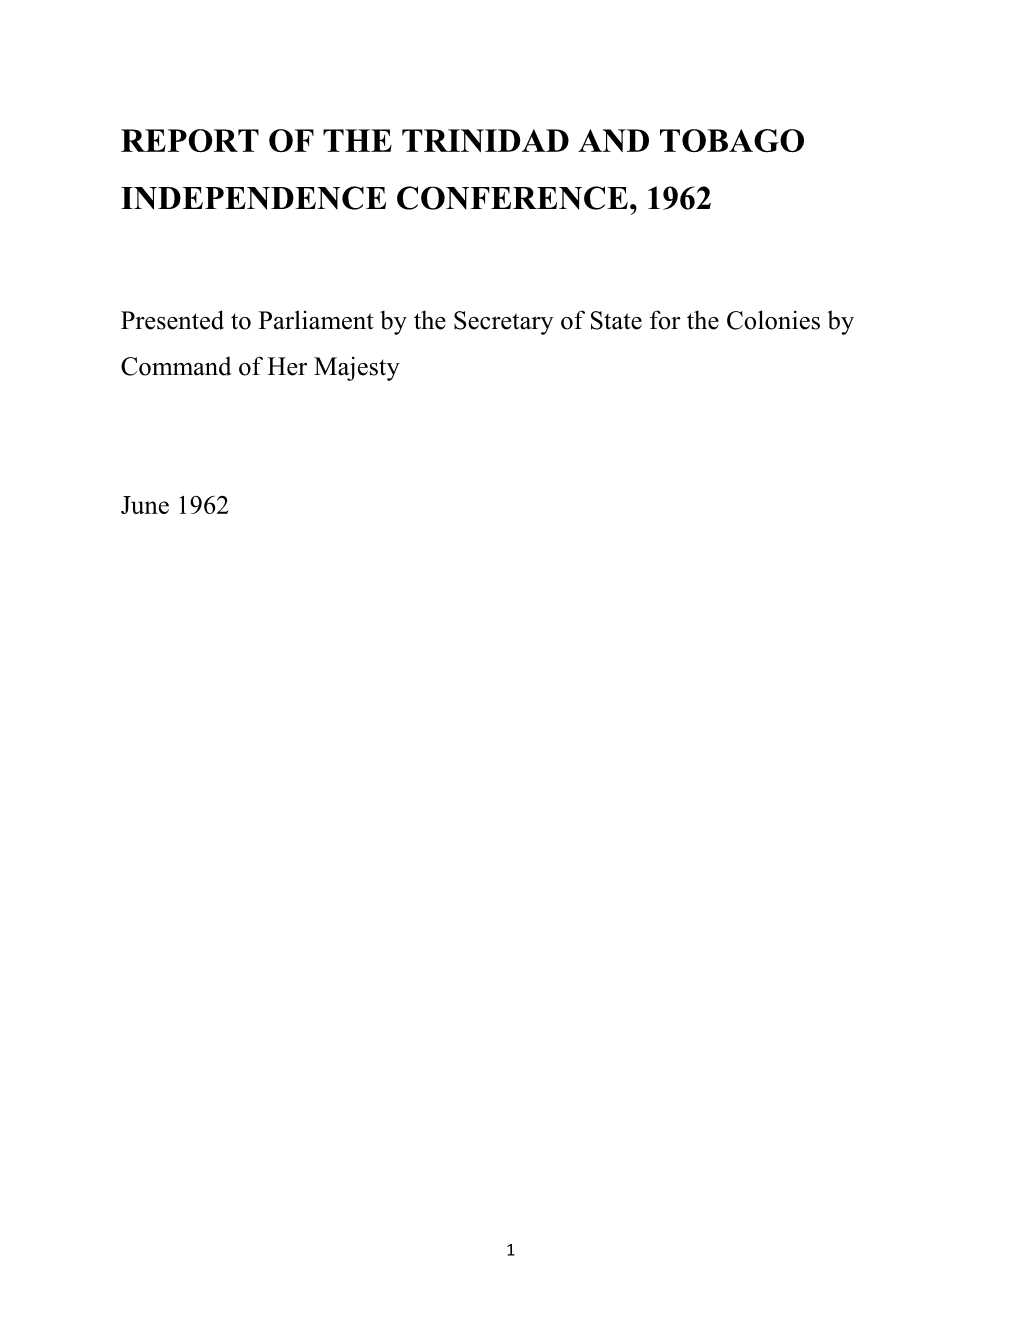 Report of the Trinidad and Tobago Independence